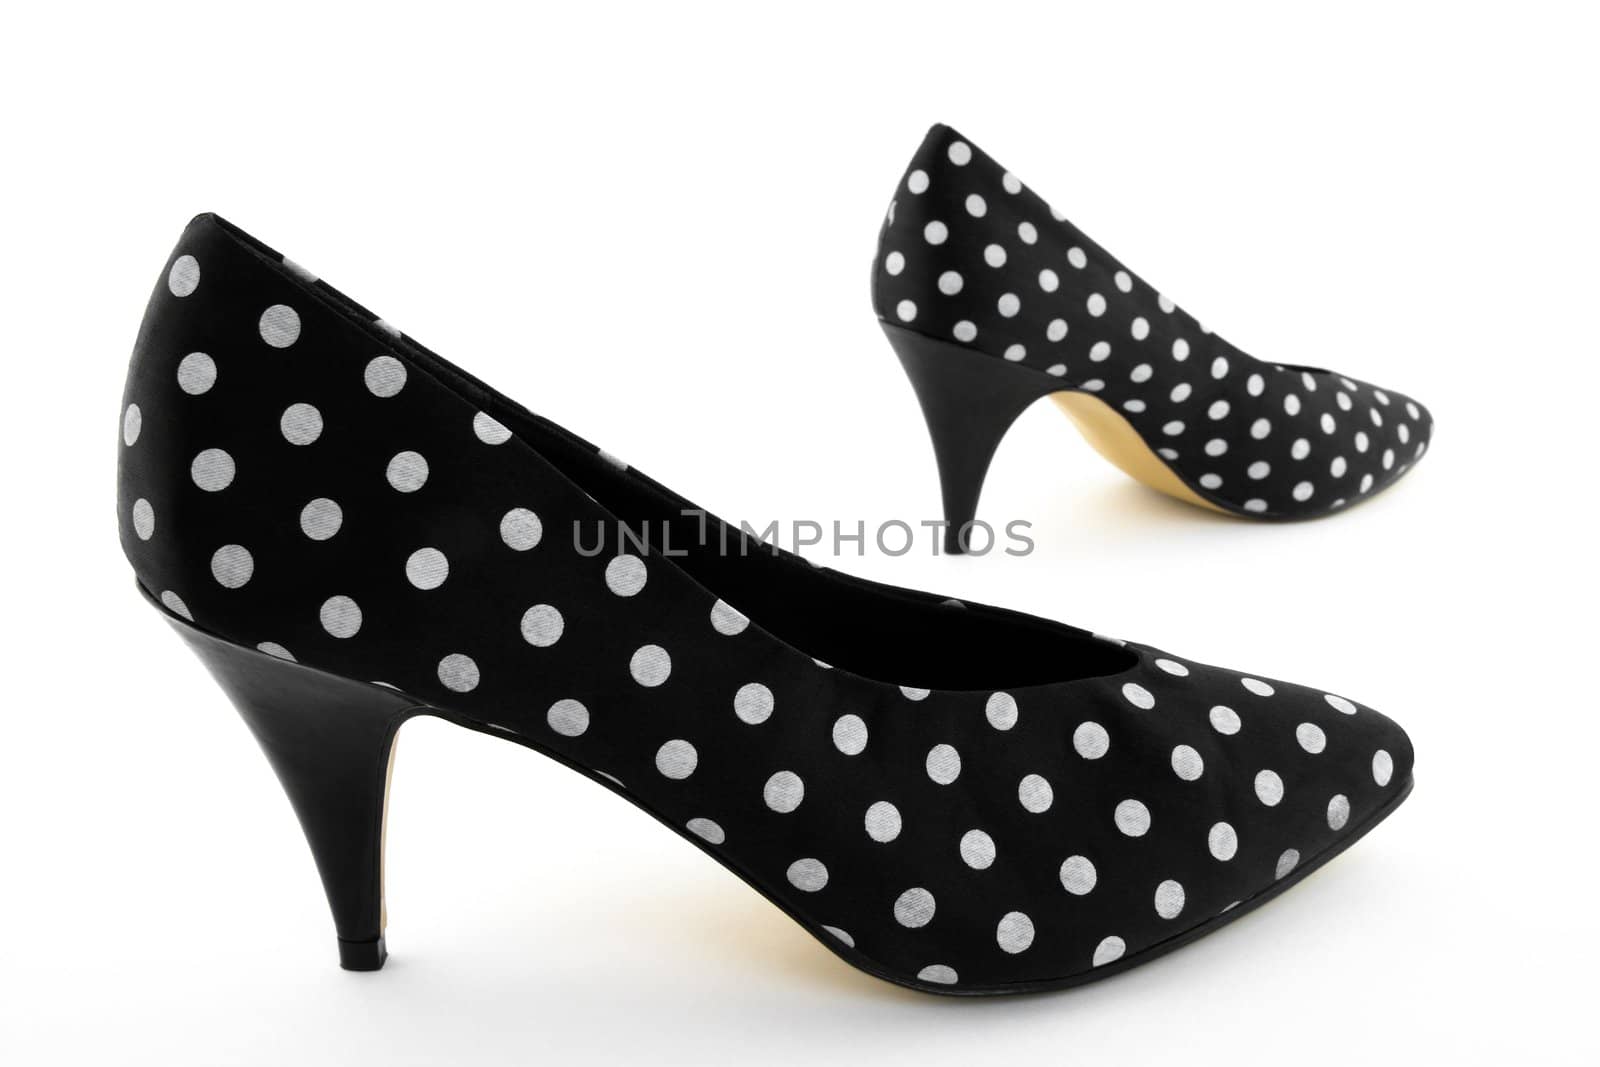 Black classic high heel polka shoes. Focus on the closest shoe.